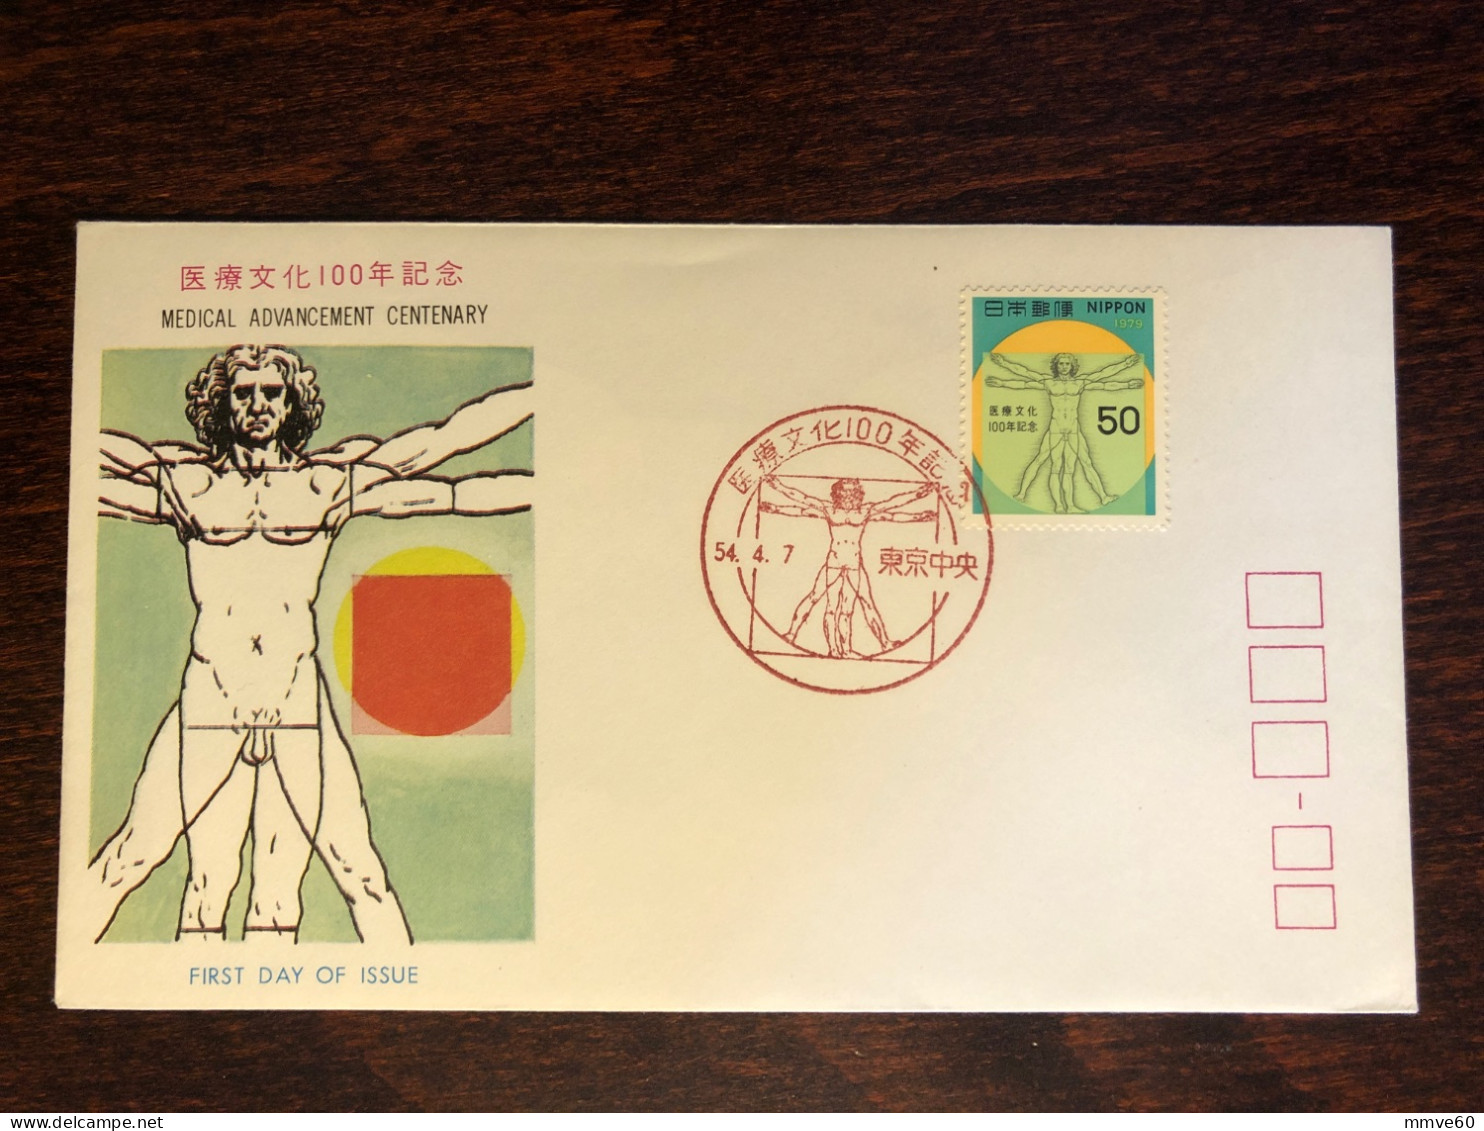 JAPAN FDC COVER 1979 YEAR MEDICAL ADVANCEMENT HEALTH MEDICINE STAMPS - FDC